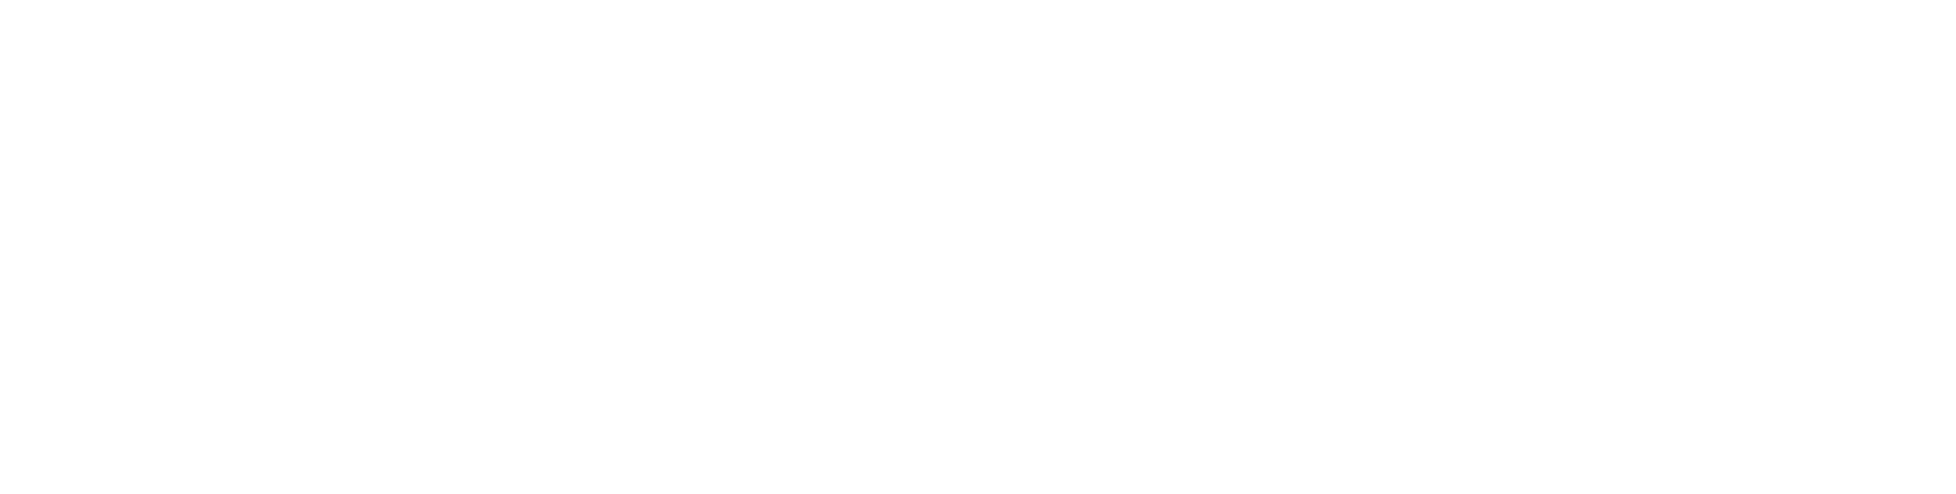 The Corcoran logo features the word 'Corcoran' in a distinct font style, accompanied by a straight line underneath featured on Erin King- Best Event Speaker website.